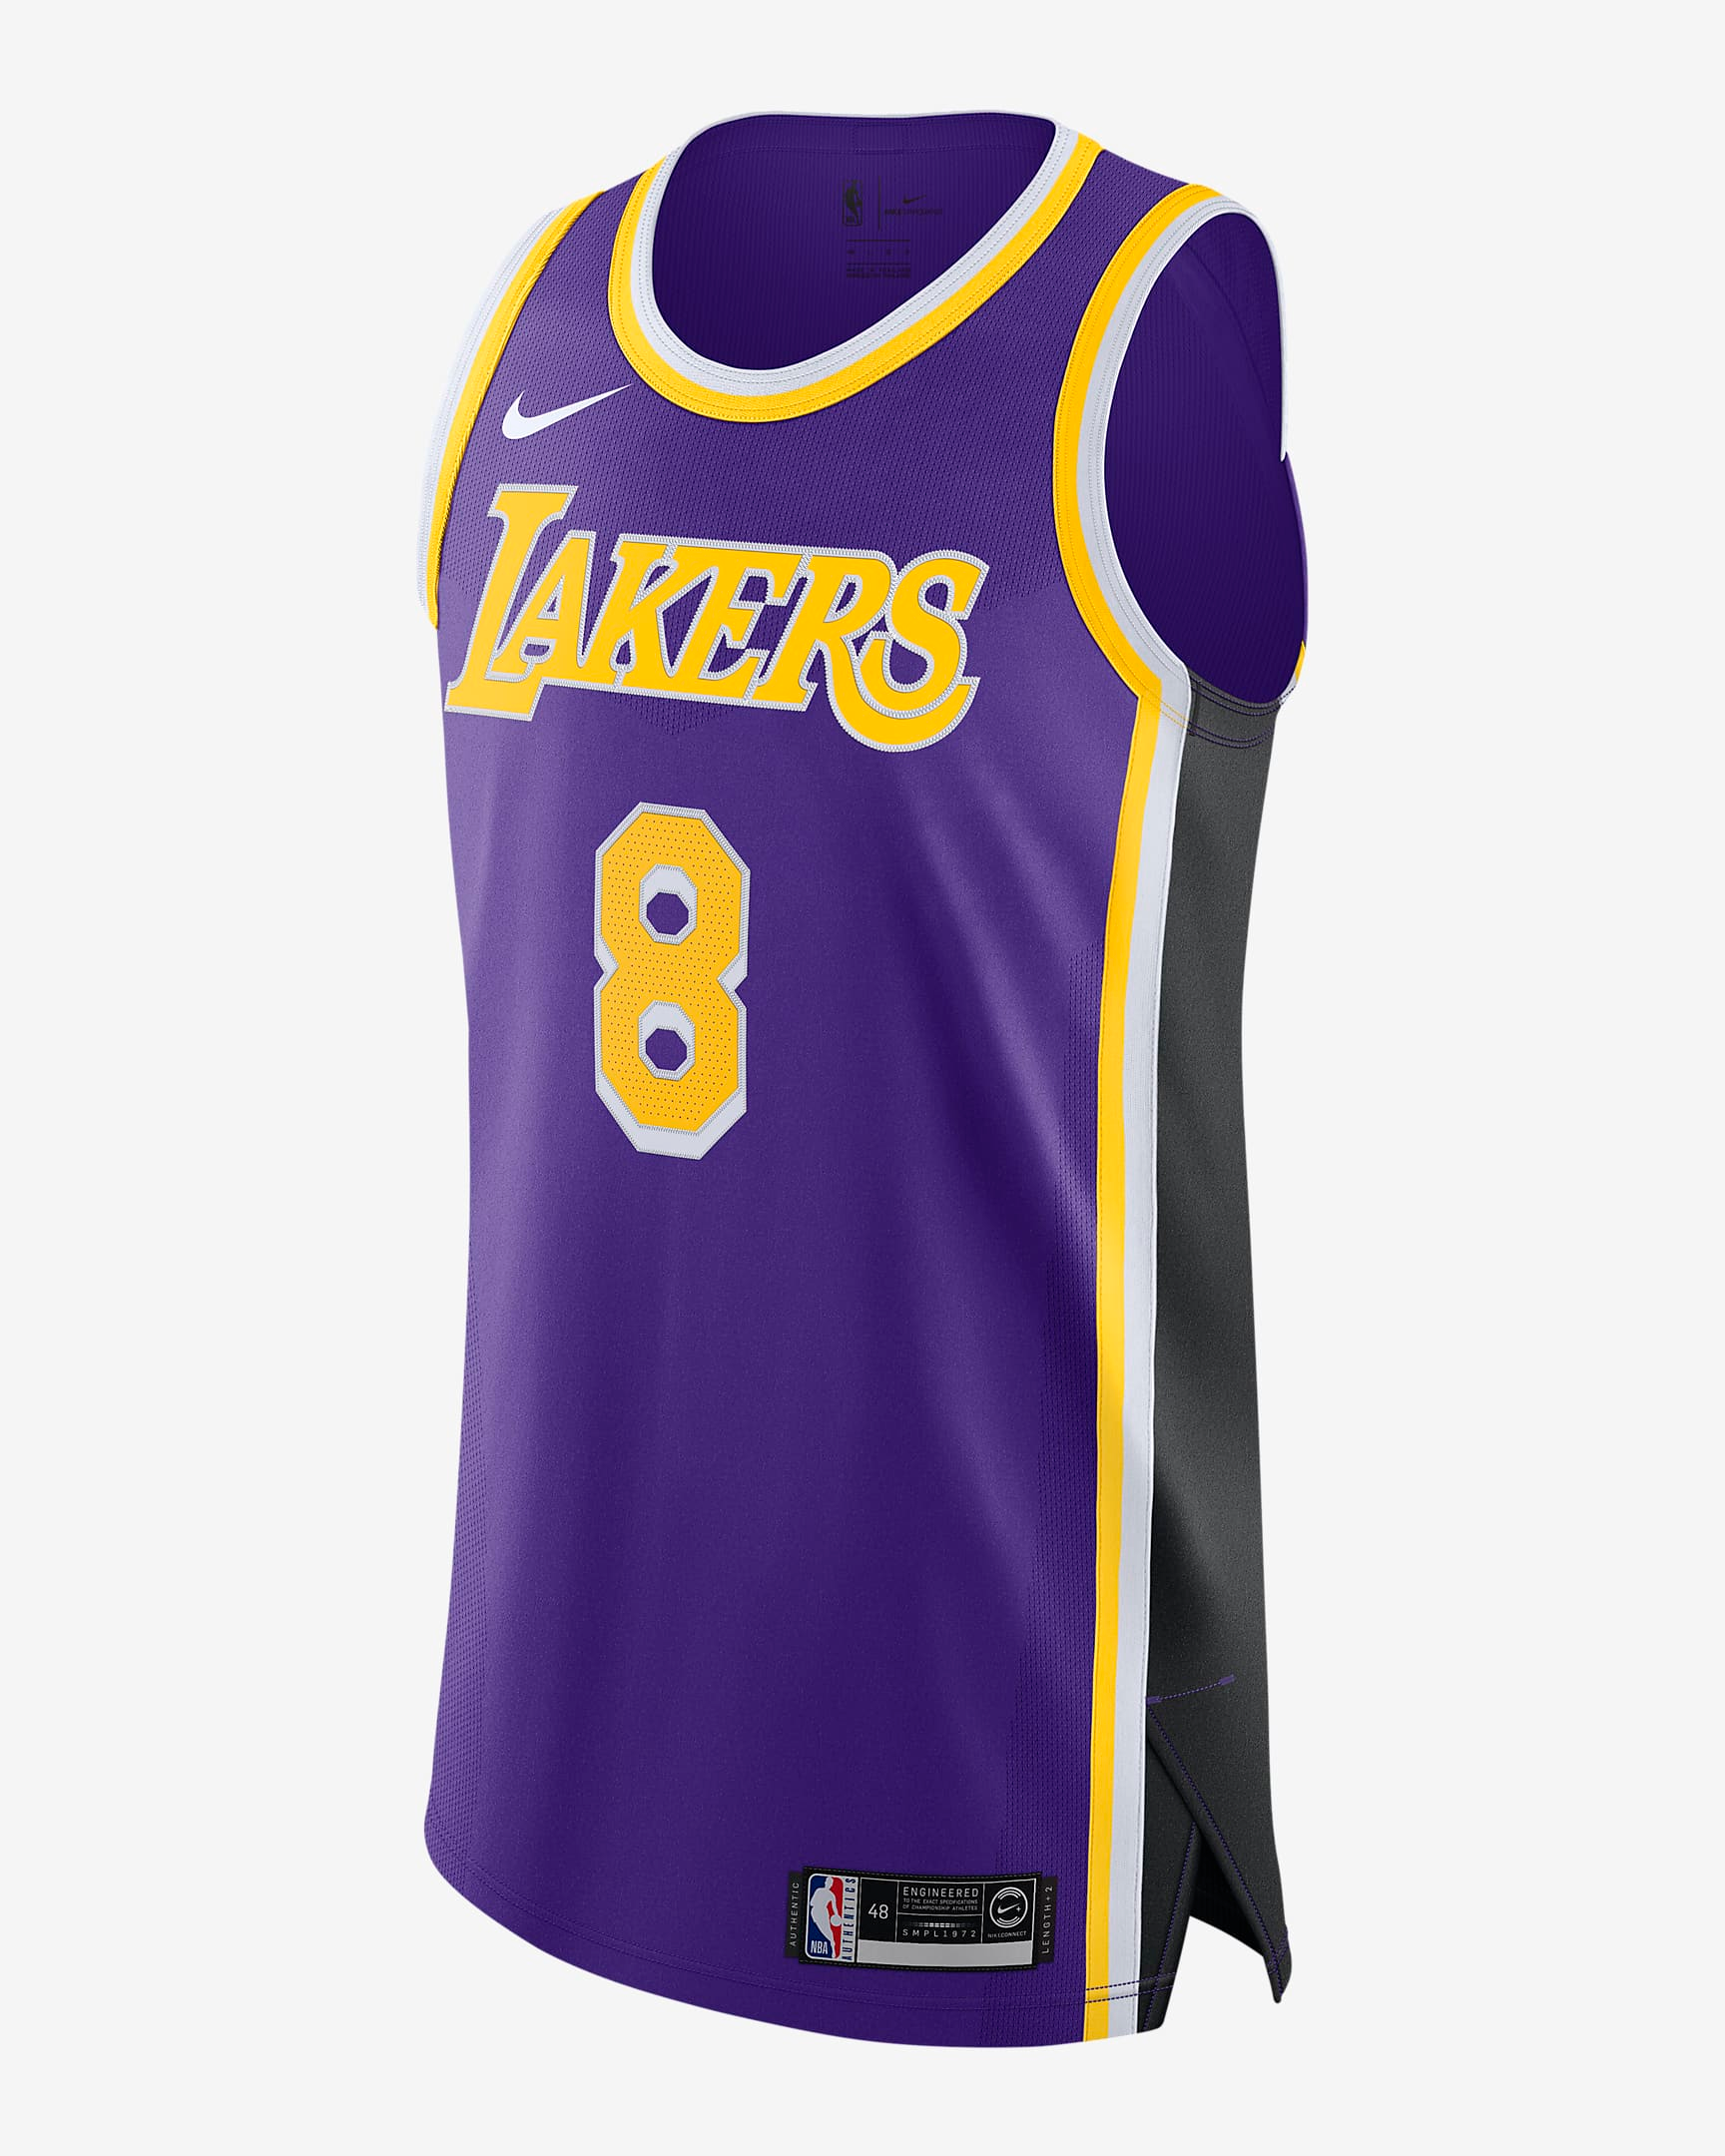 lakers 48 jersey